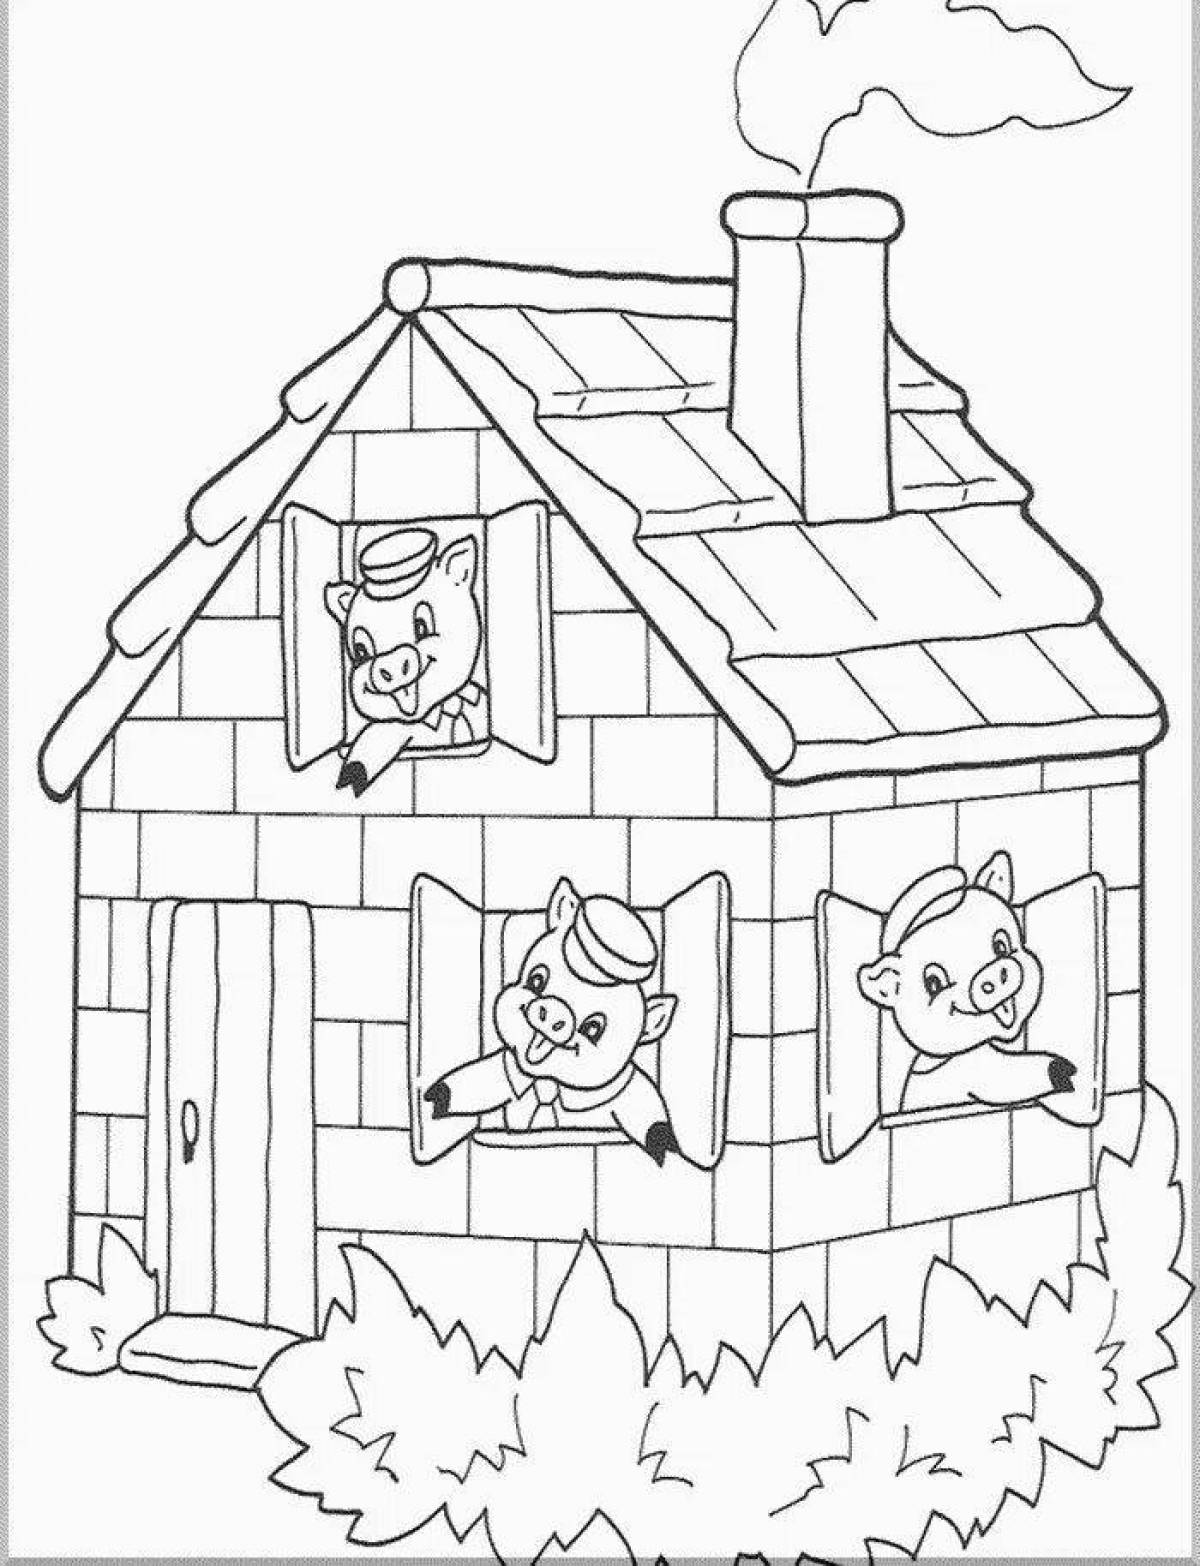 Colorful coloring three little pigs for children